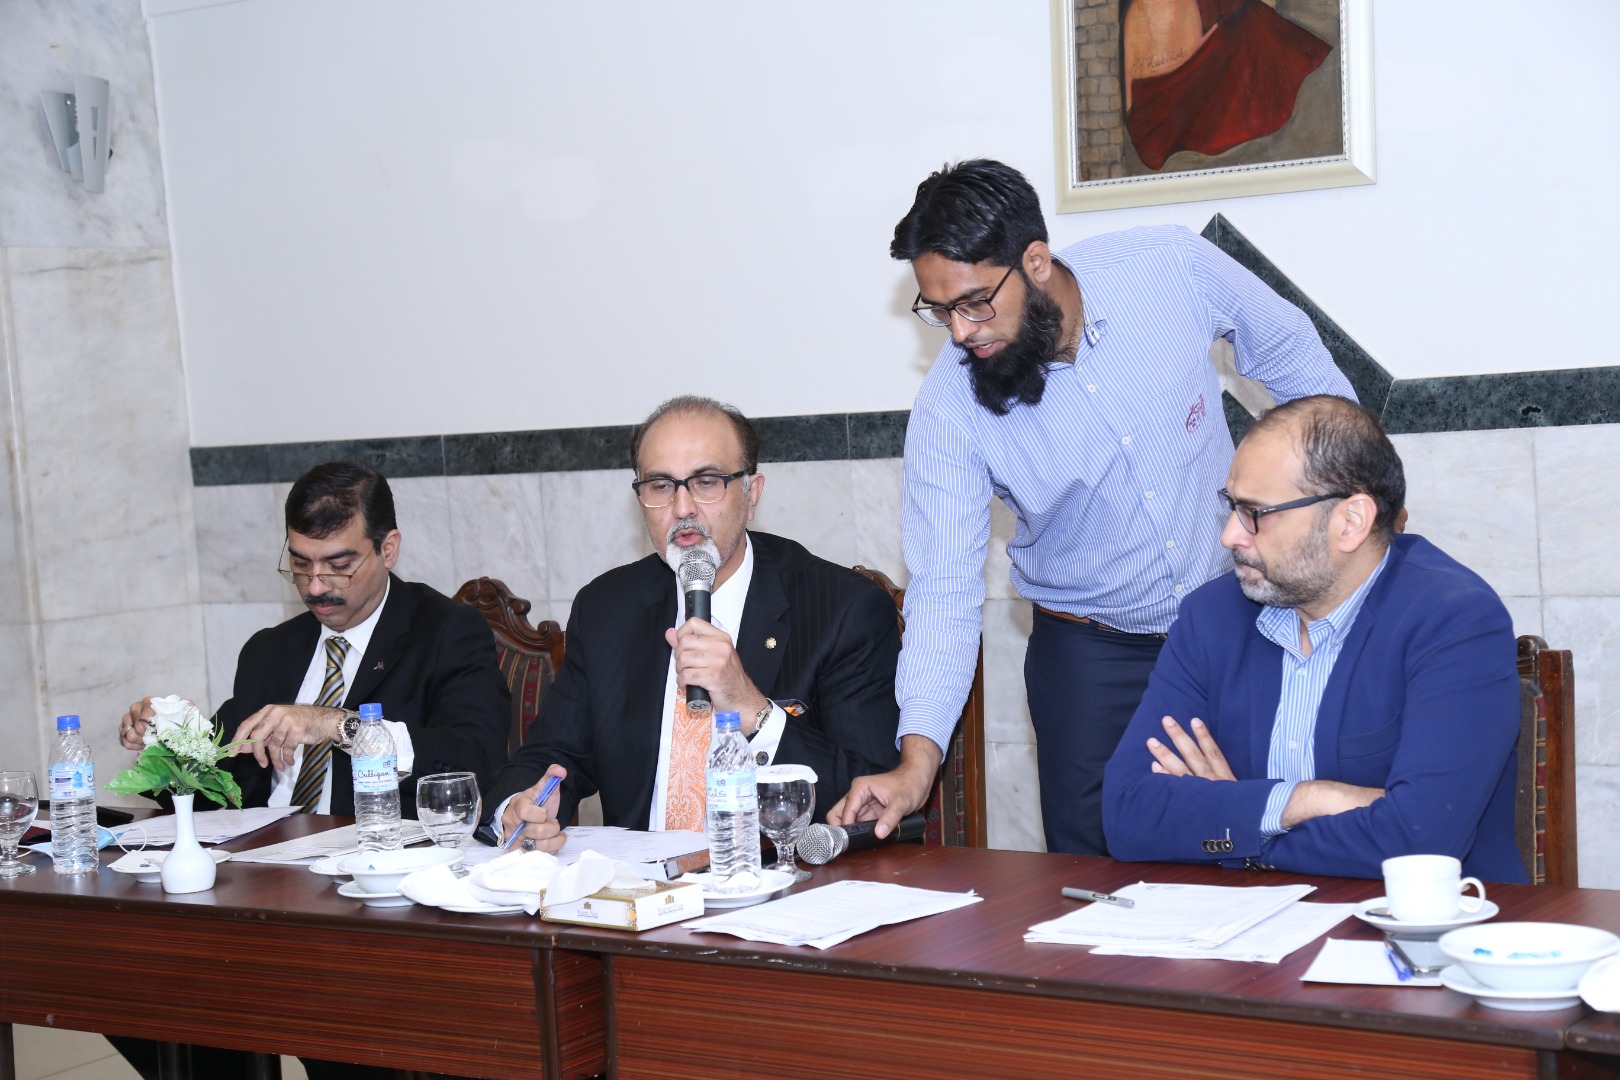 56th Annual General Meeting of PHA was held at Regent Plaza Hotel, Karachi on September 29, 2020